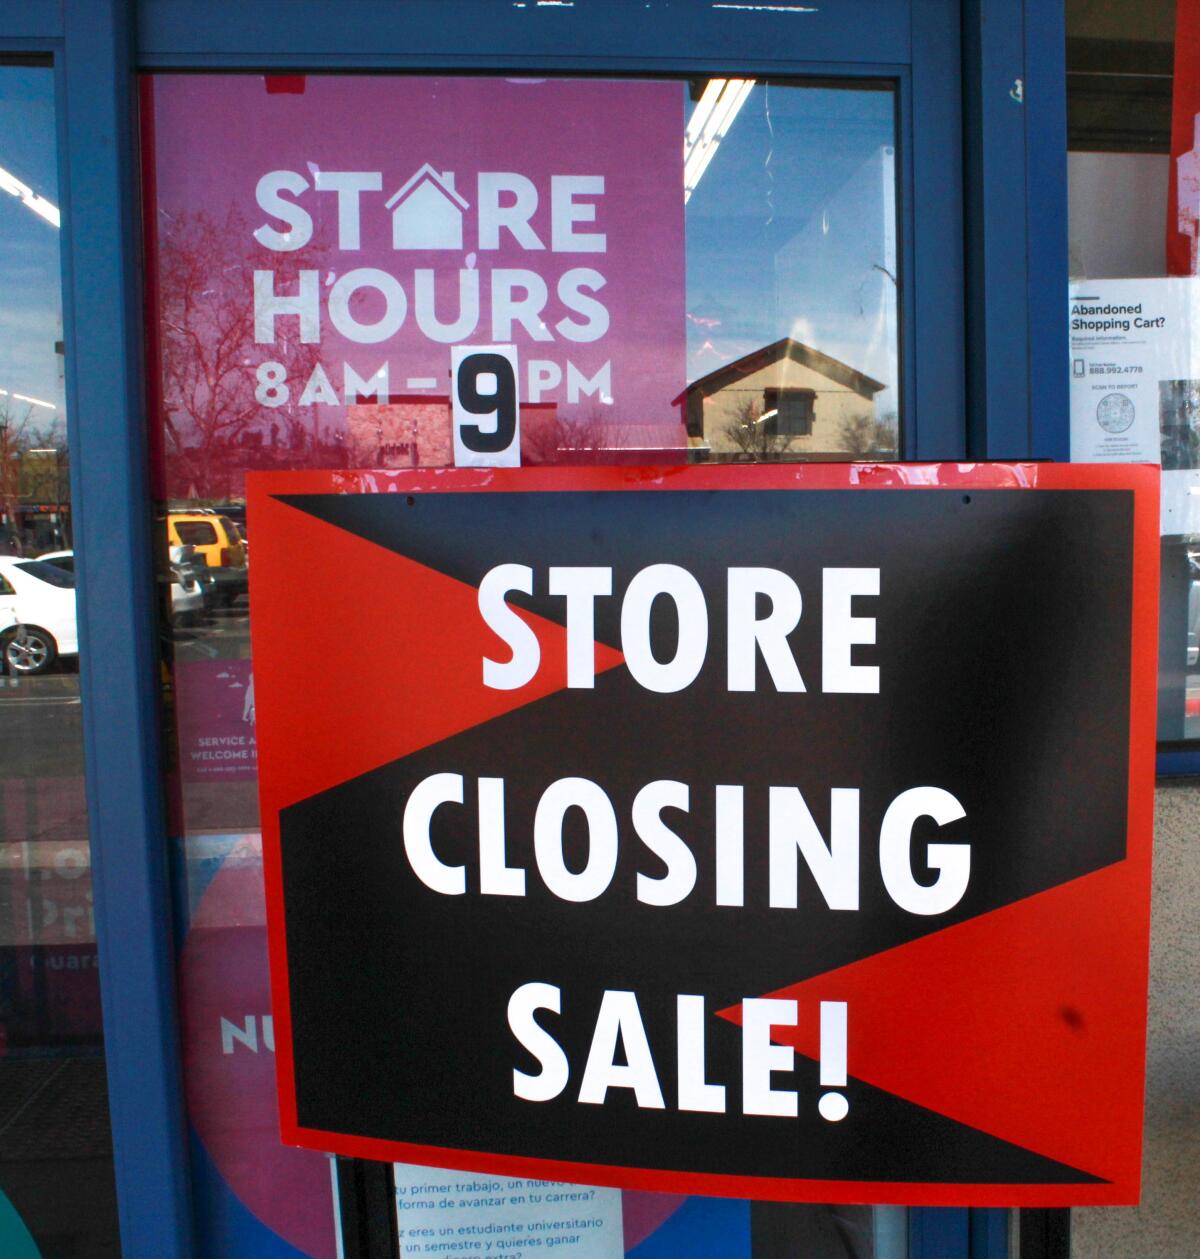 The Ramona 99 Cents Only Stores outlet is having a “Closeout Sale” during the hours of 8 a.m. to 9 p.m.